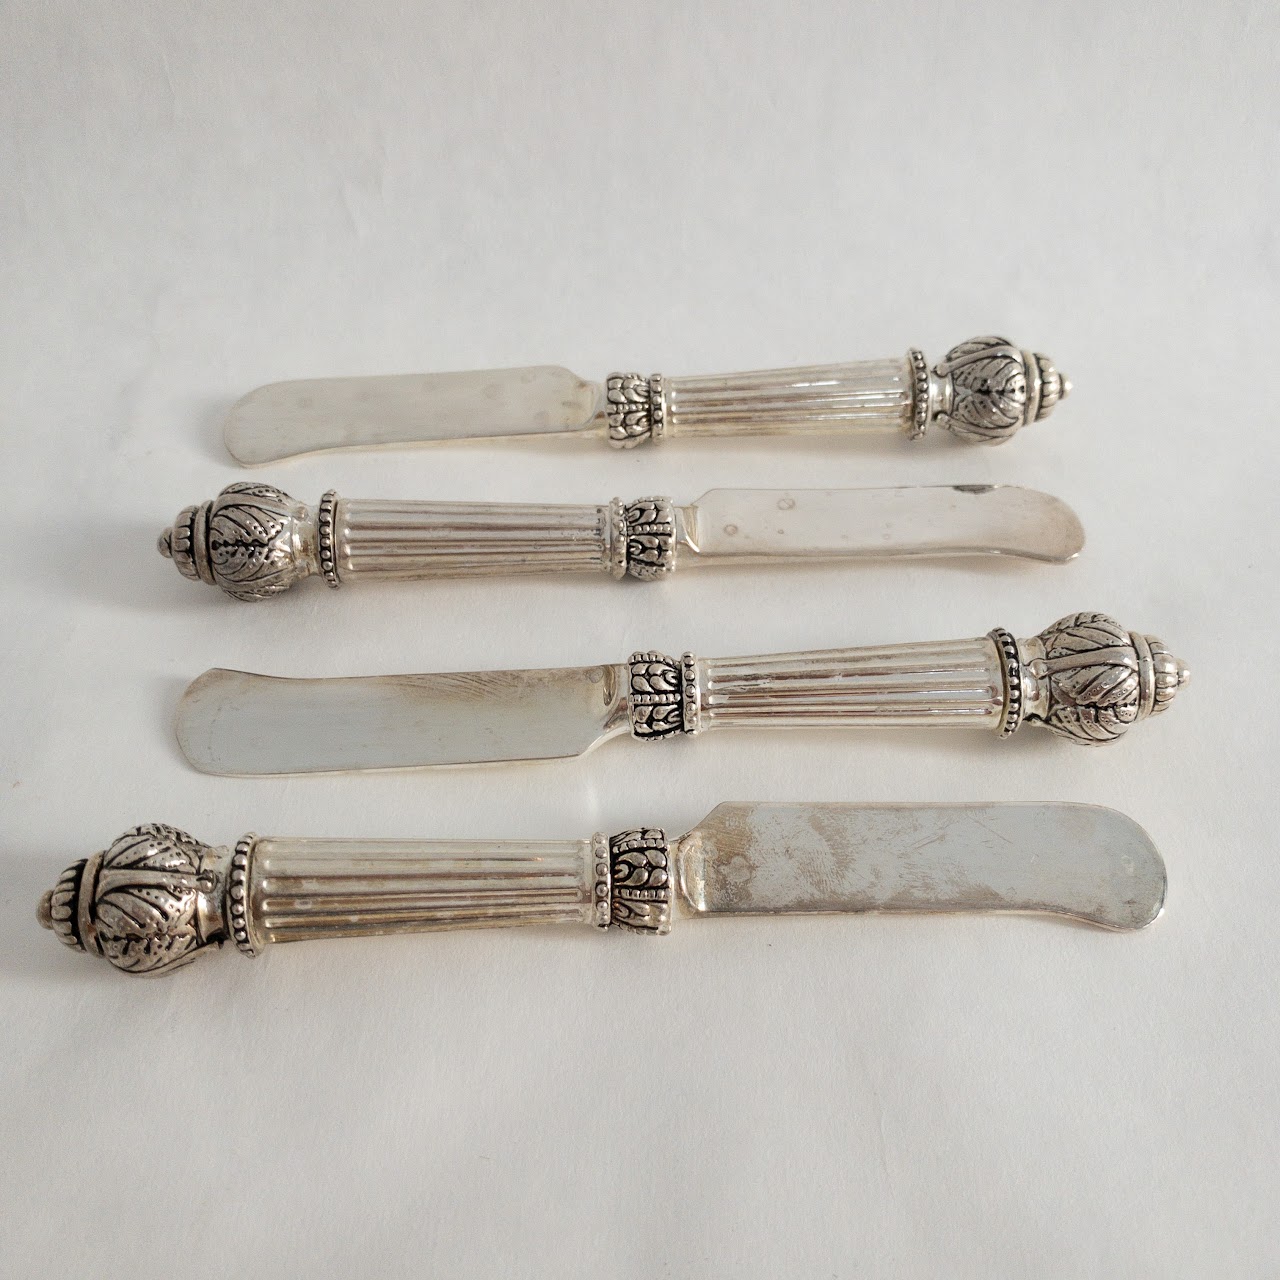 Silver-Plated Decorative Butter Knife Set